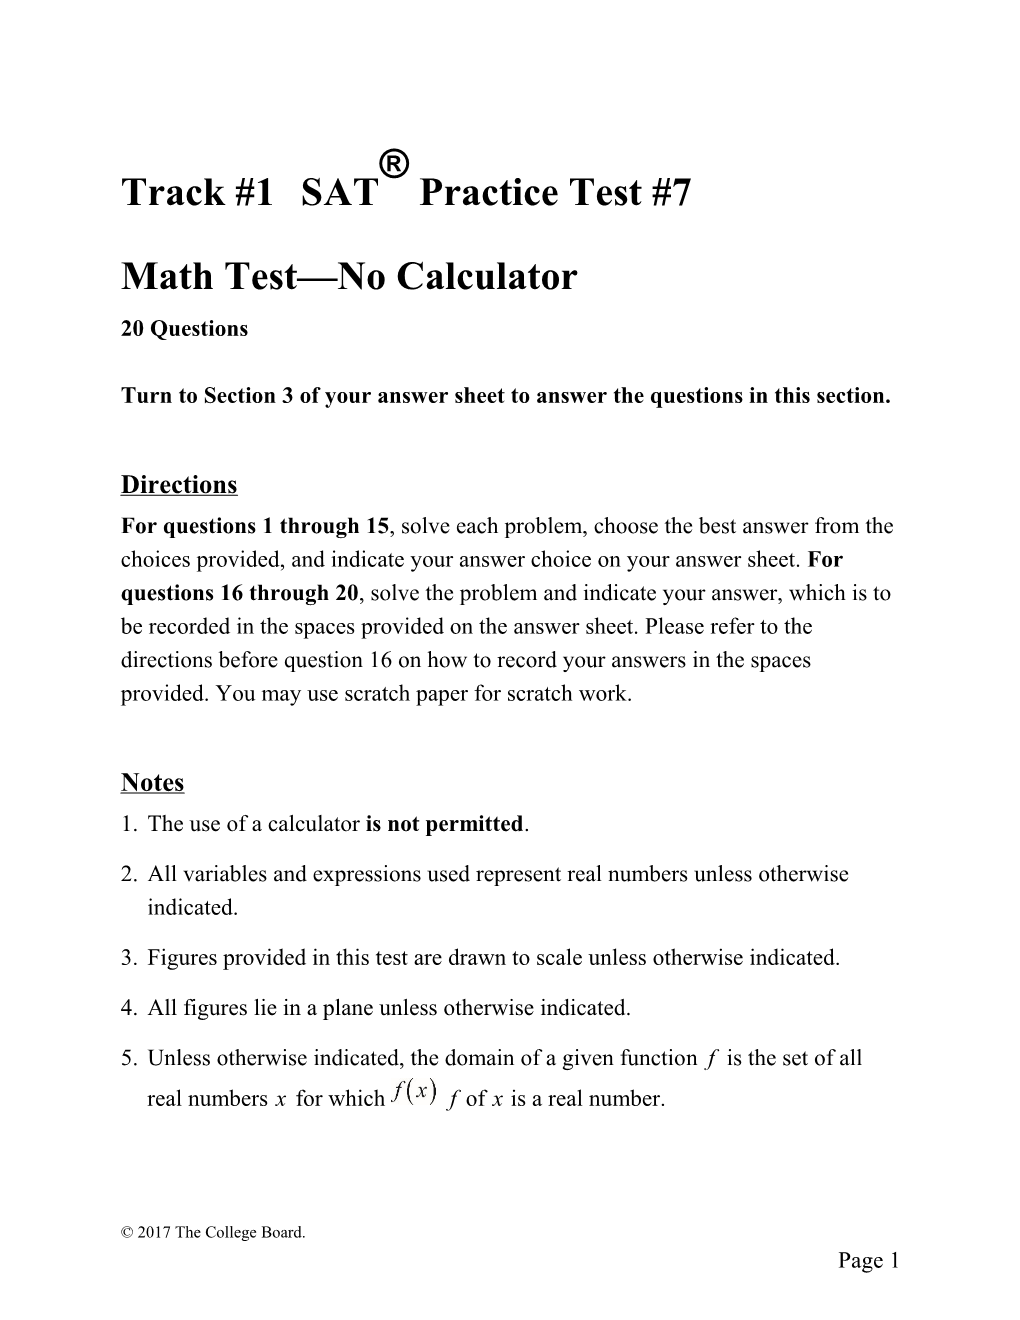 SAT Practice Test 7 for Assistive Technology Math Test, No Calculator SAT Suite of Assessments